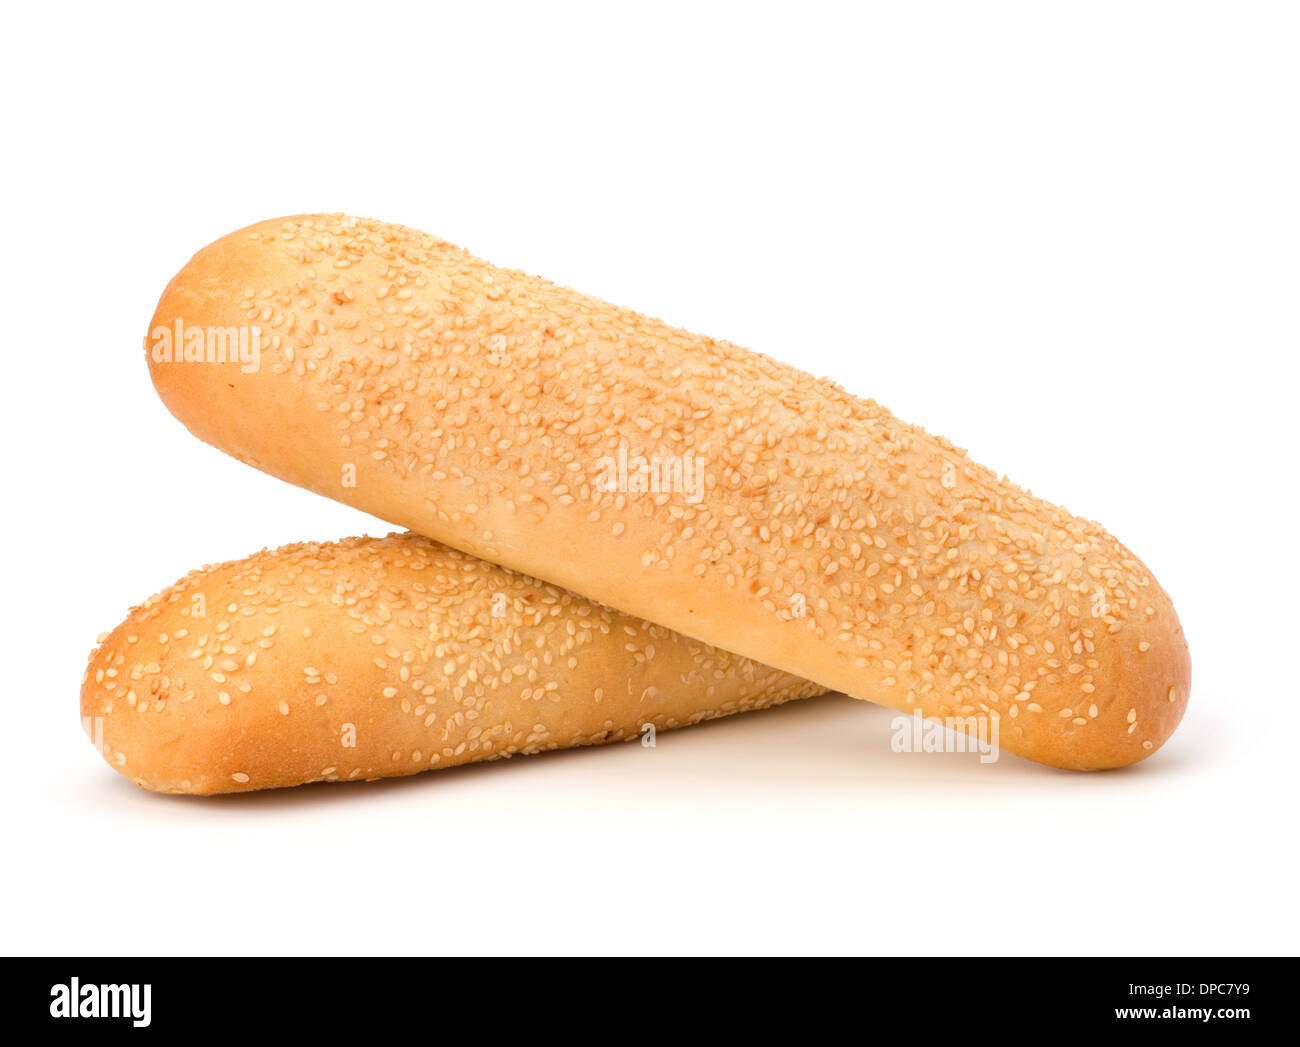 Healthy grain french baguette bread loaf isolated on white background Stock Photo